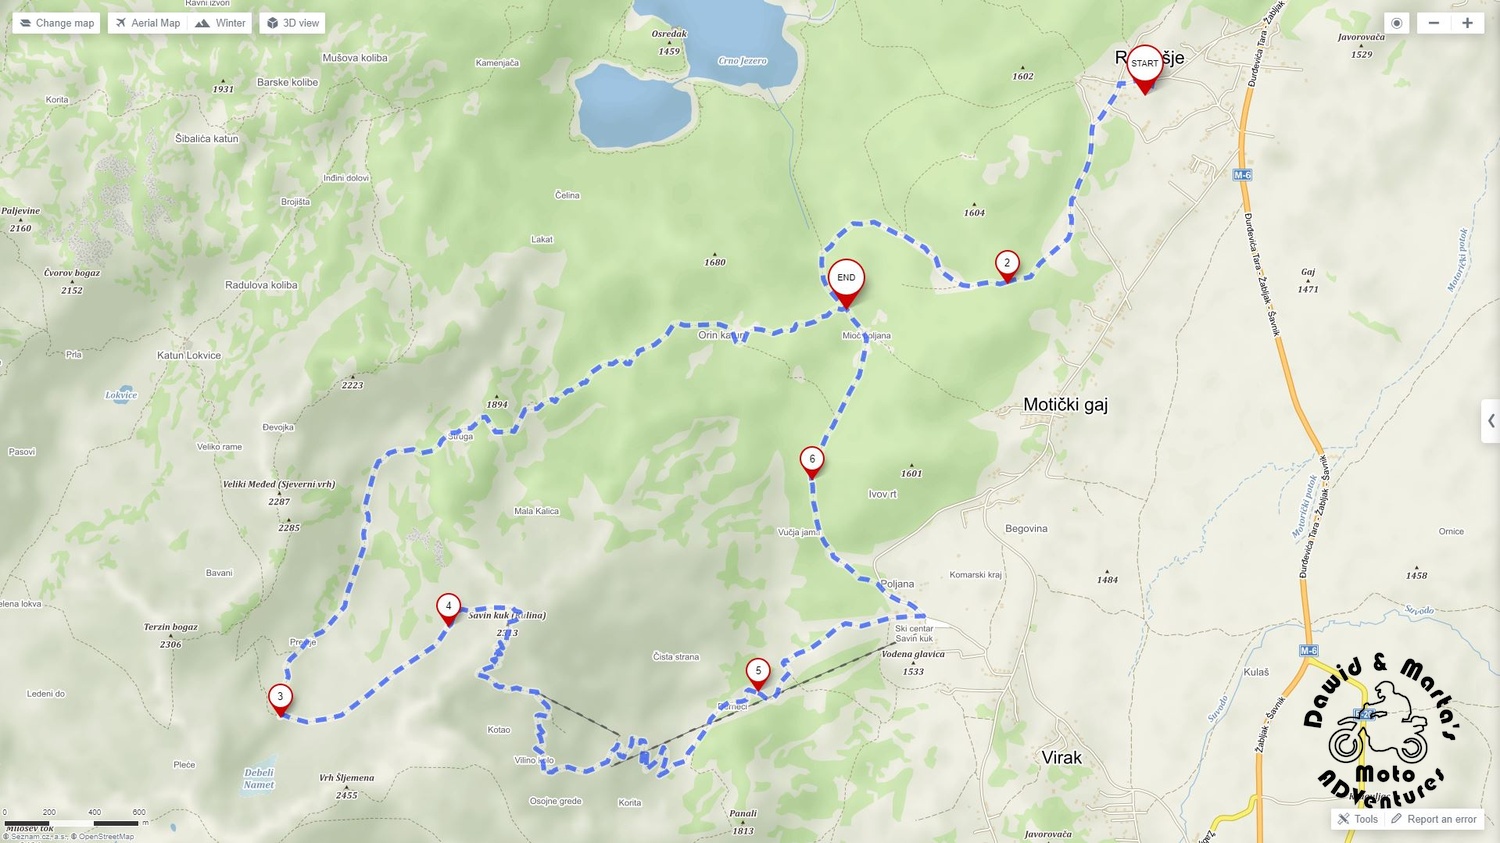 Our planned route to Savin Kuk top for hiking in Durmitor National Park